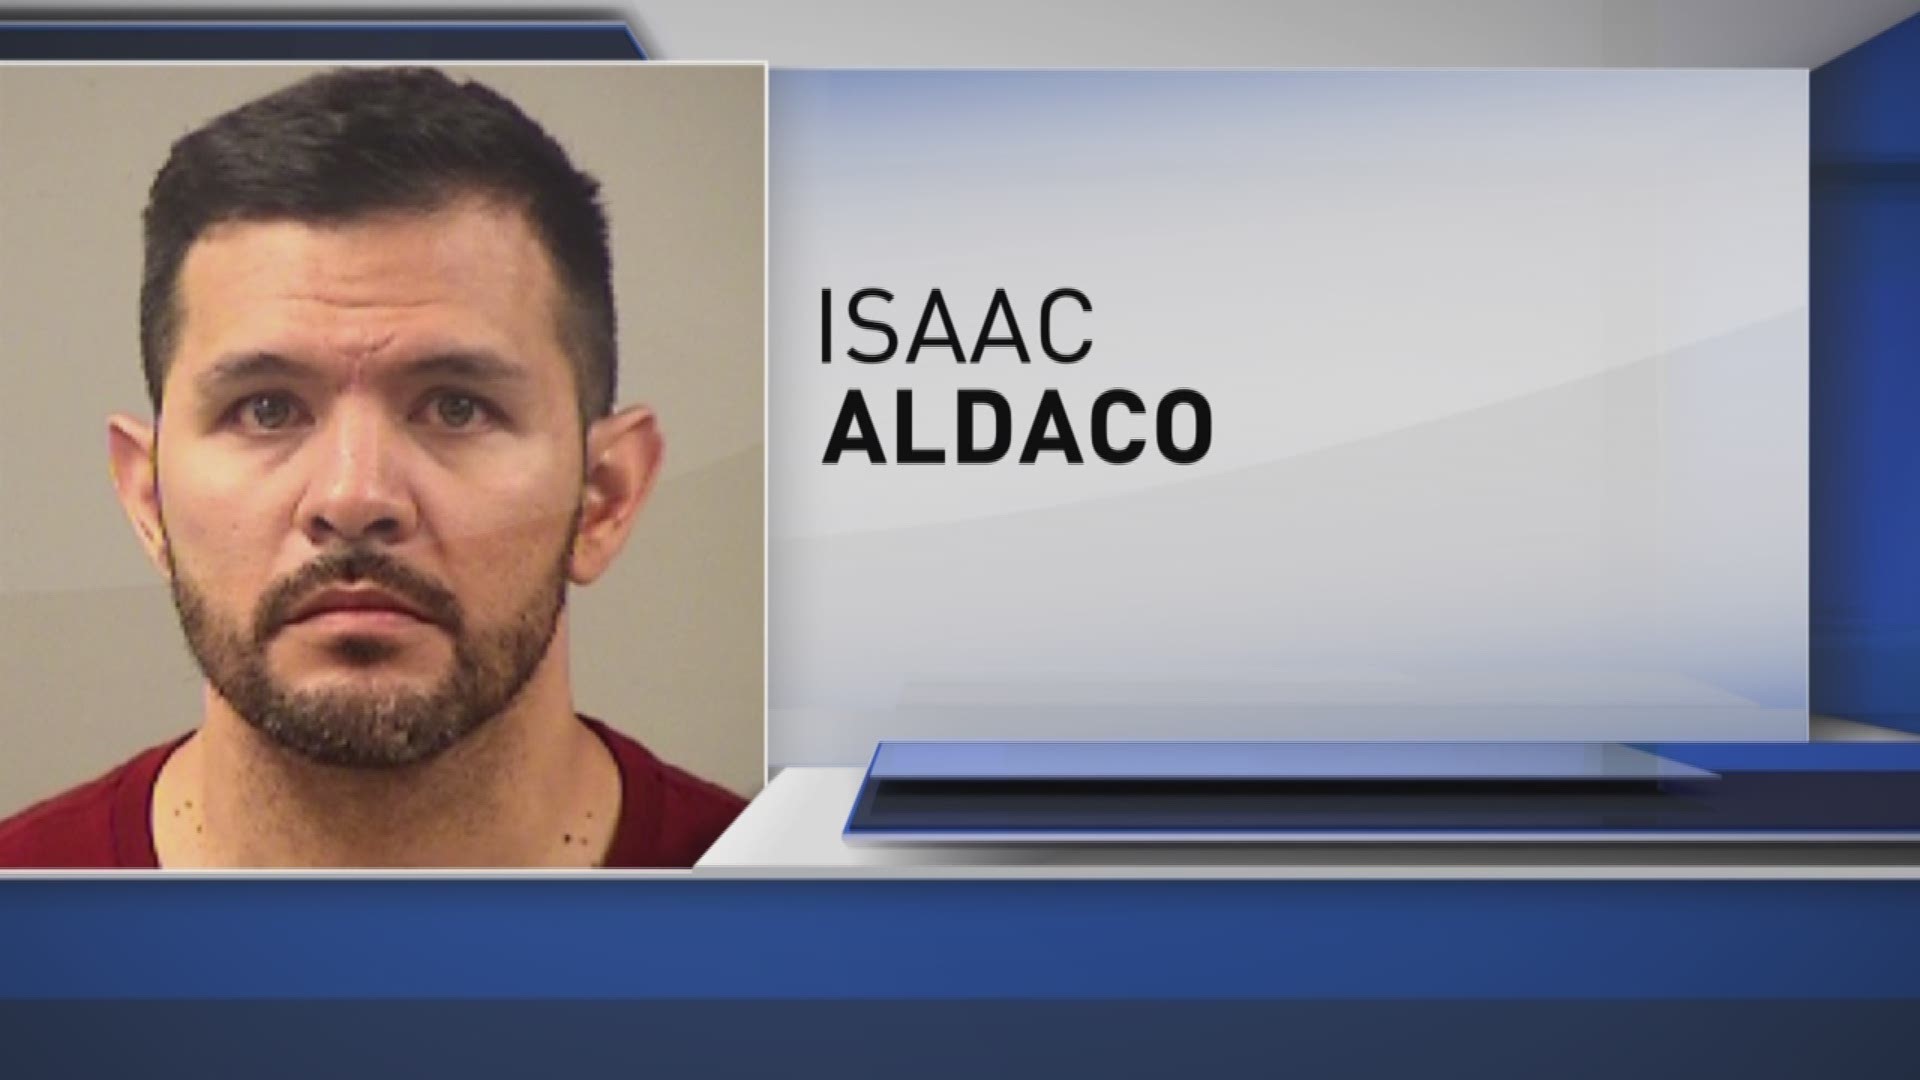 Isaac Aldaco, 34, faces charges of indecency with a child and improper relationship between an educator and student.